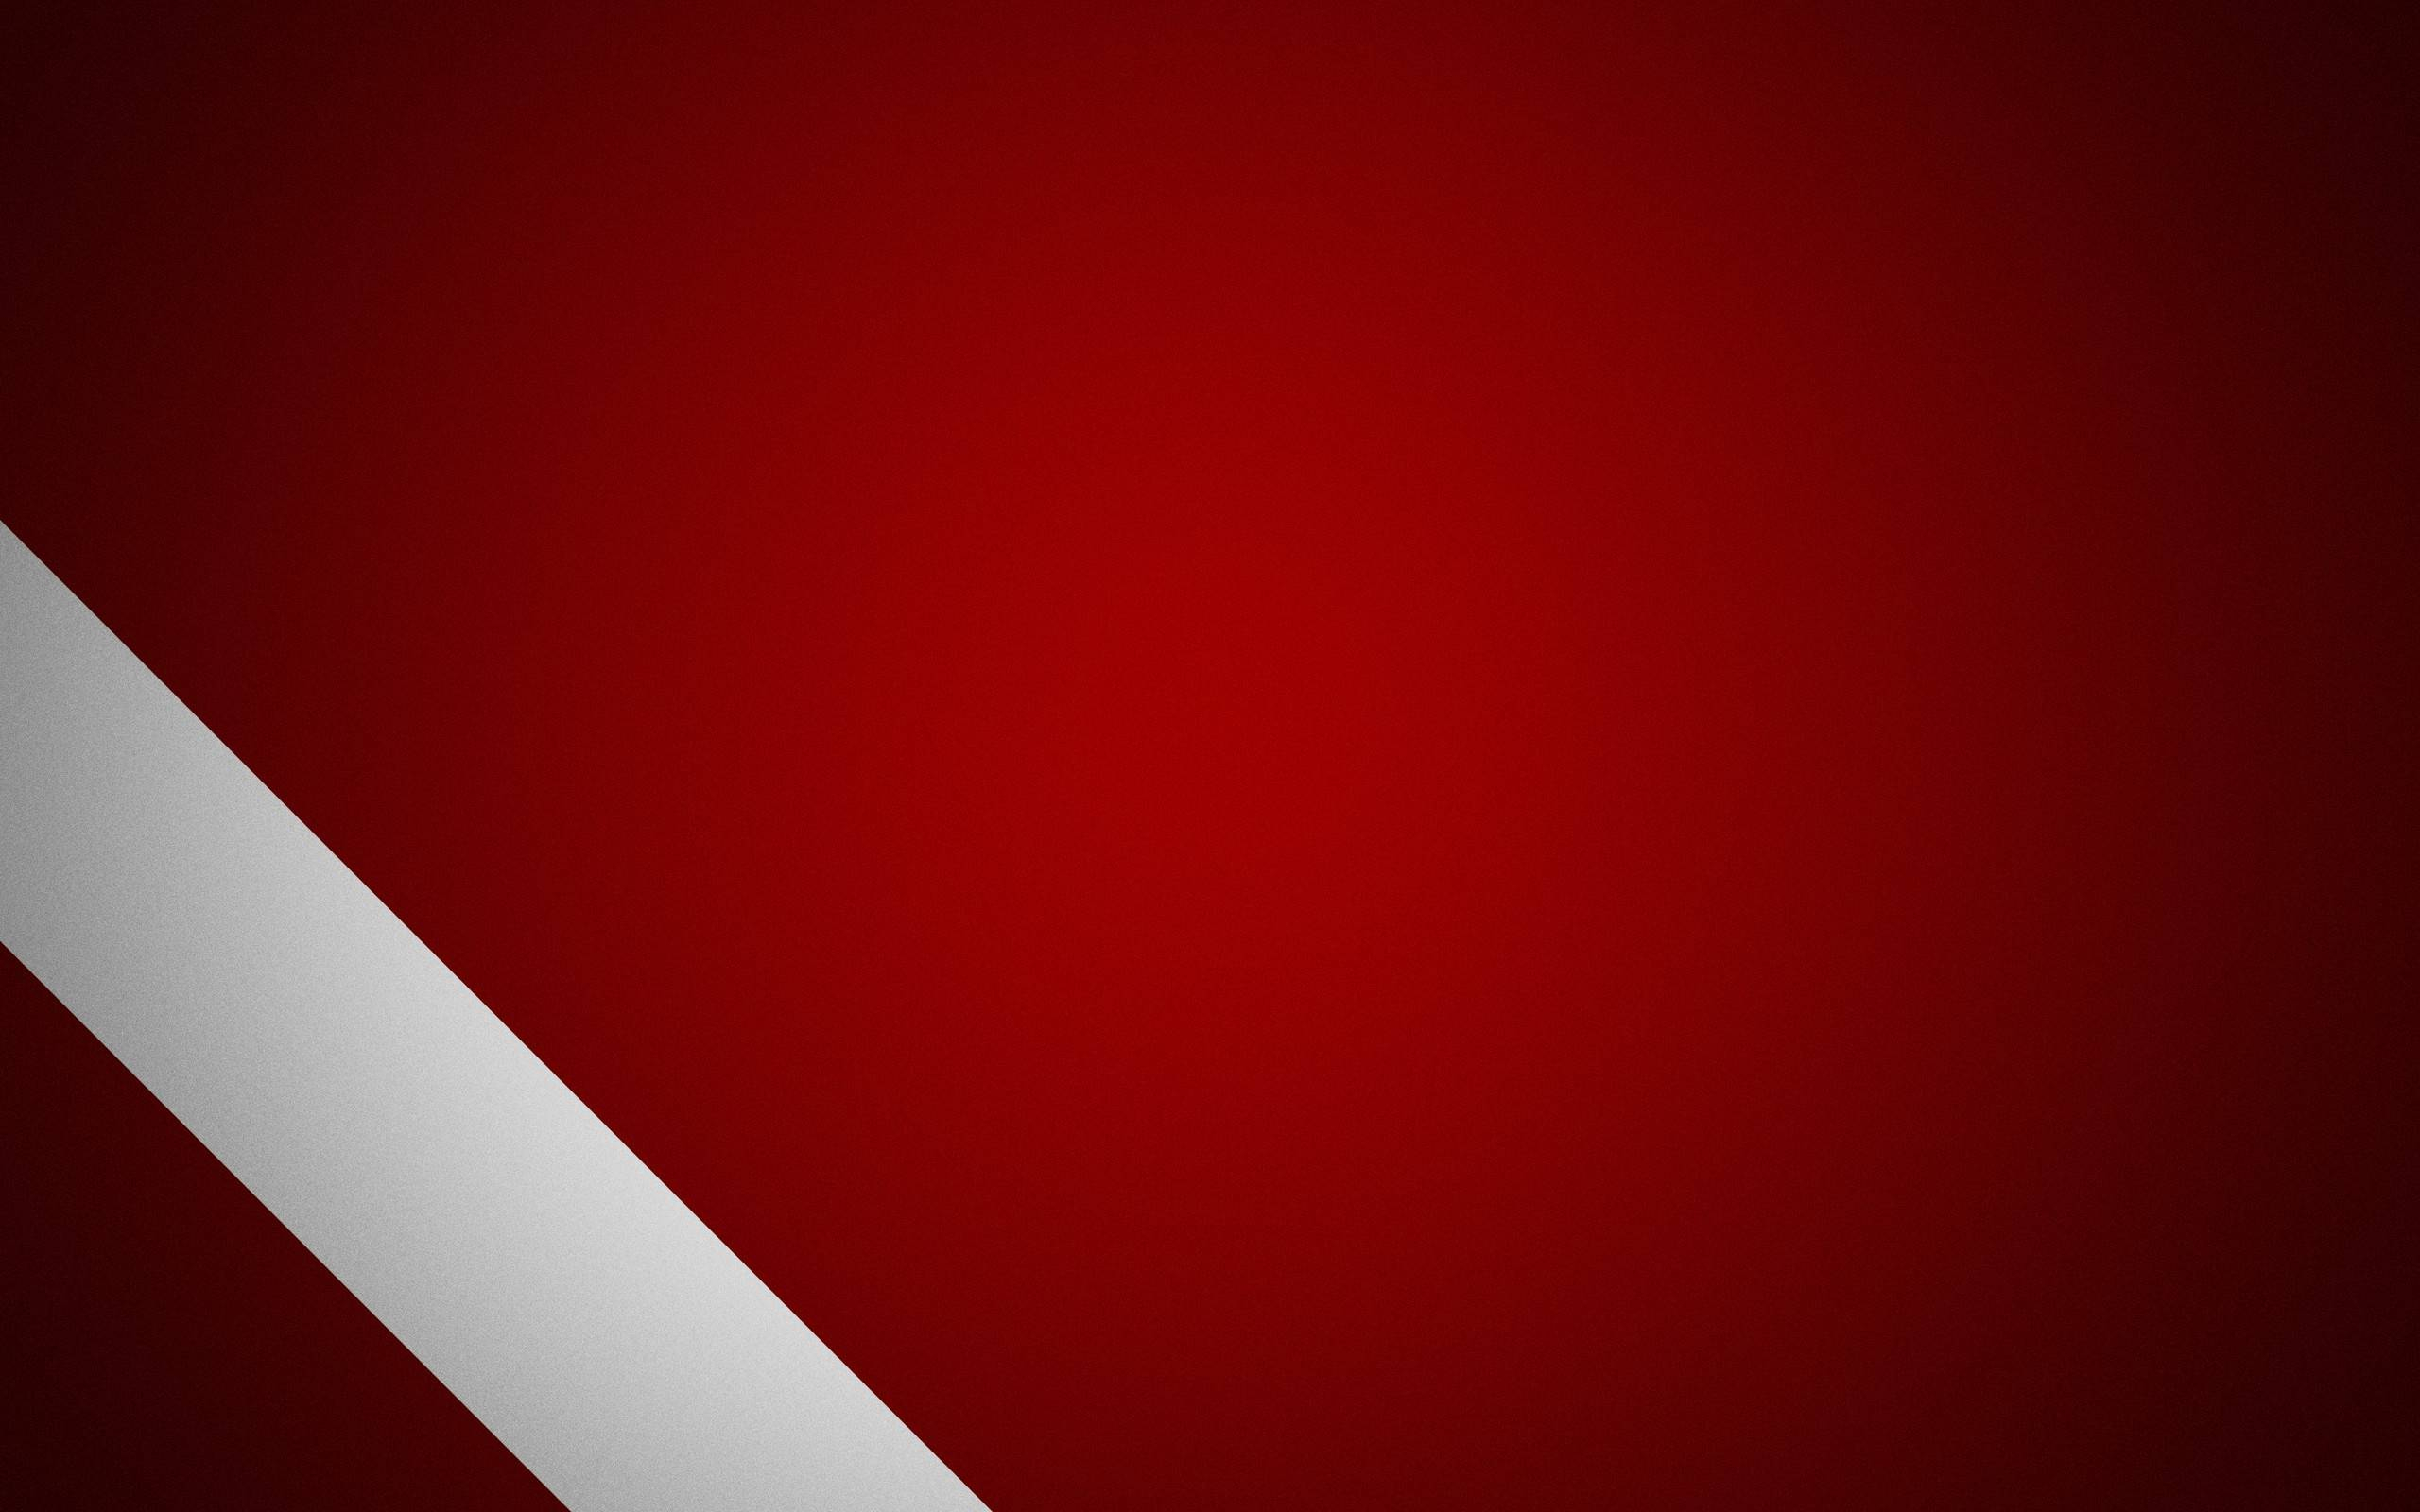 2560x1600 Free download Red Black White Abstract Wallpaper [] for your Desktop, Mobile \u0026 Tablet | Explore 34+ Abstract White And Red Wallpapers | Abstract White And Red Wallpapers, Red Black White Abstract